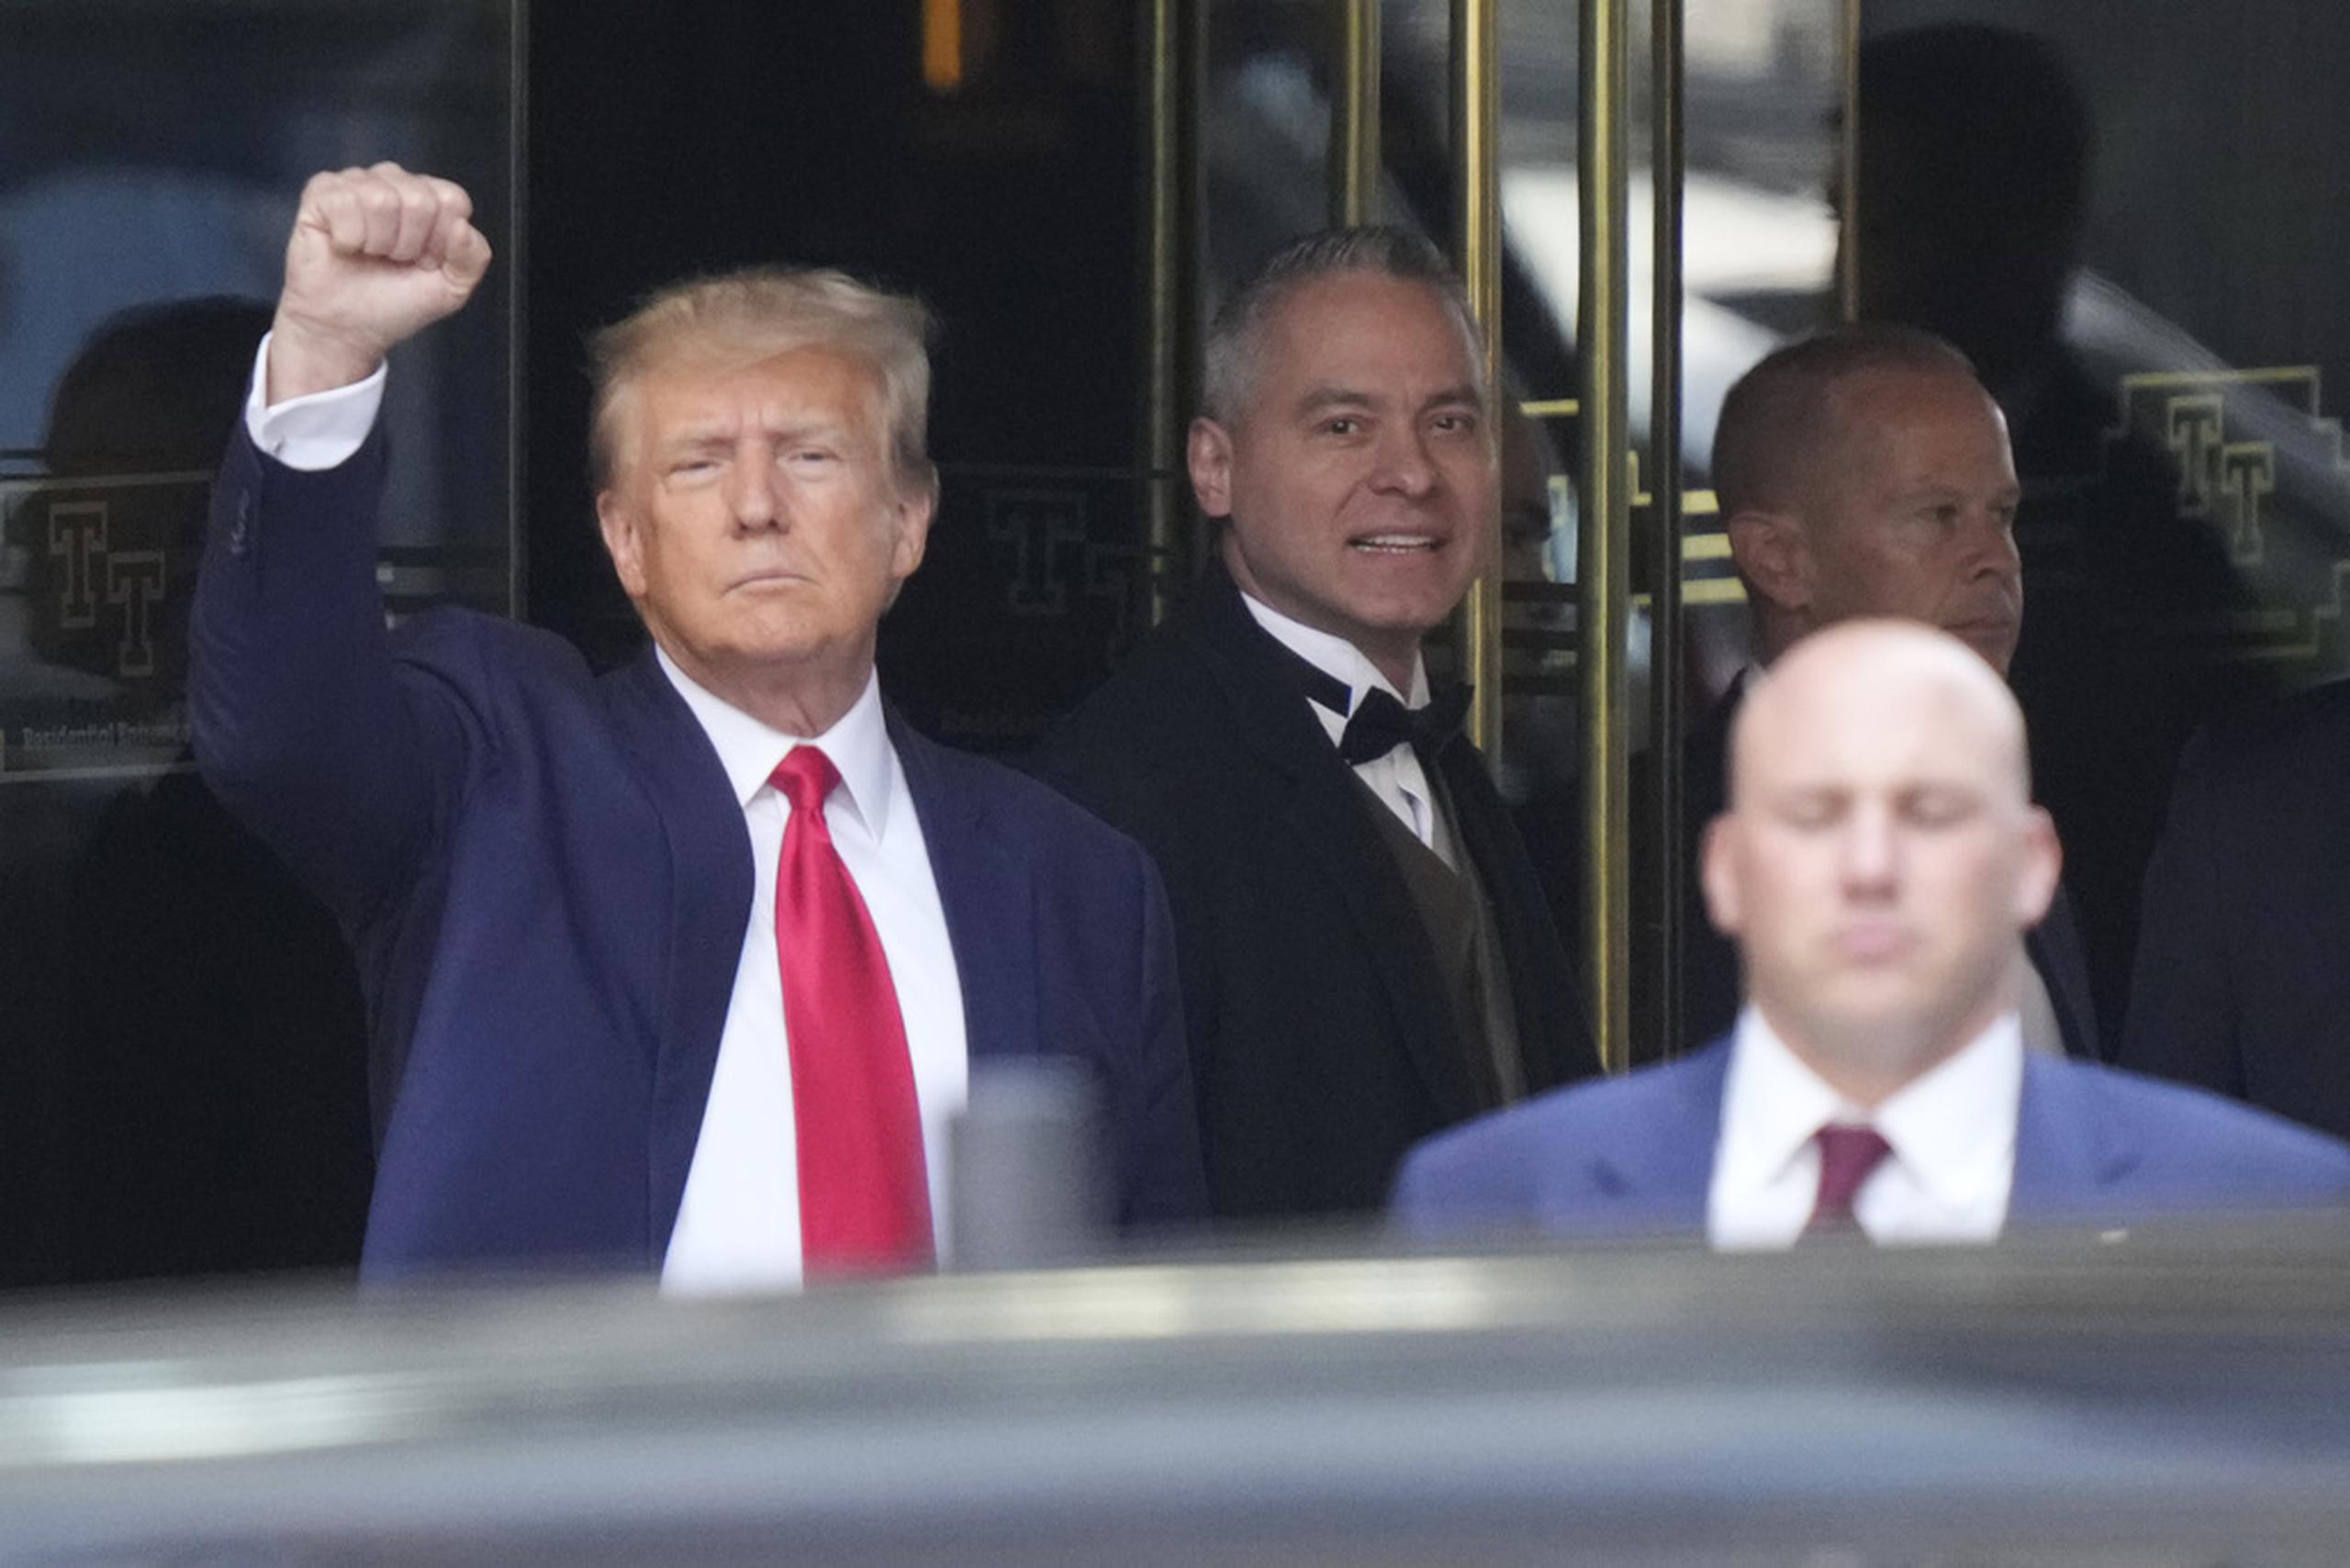 Former President Donald Trump leaves Trump Tower in New York on Tuesday, April 4, 2023. Trump will surrender in Manhattan on Tuesday to face criminal charges stemming from 2016 hush money payments. (AP Photo/Bryan Woolston)